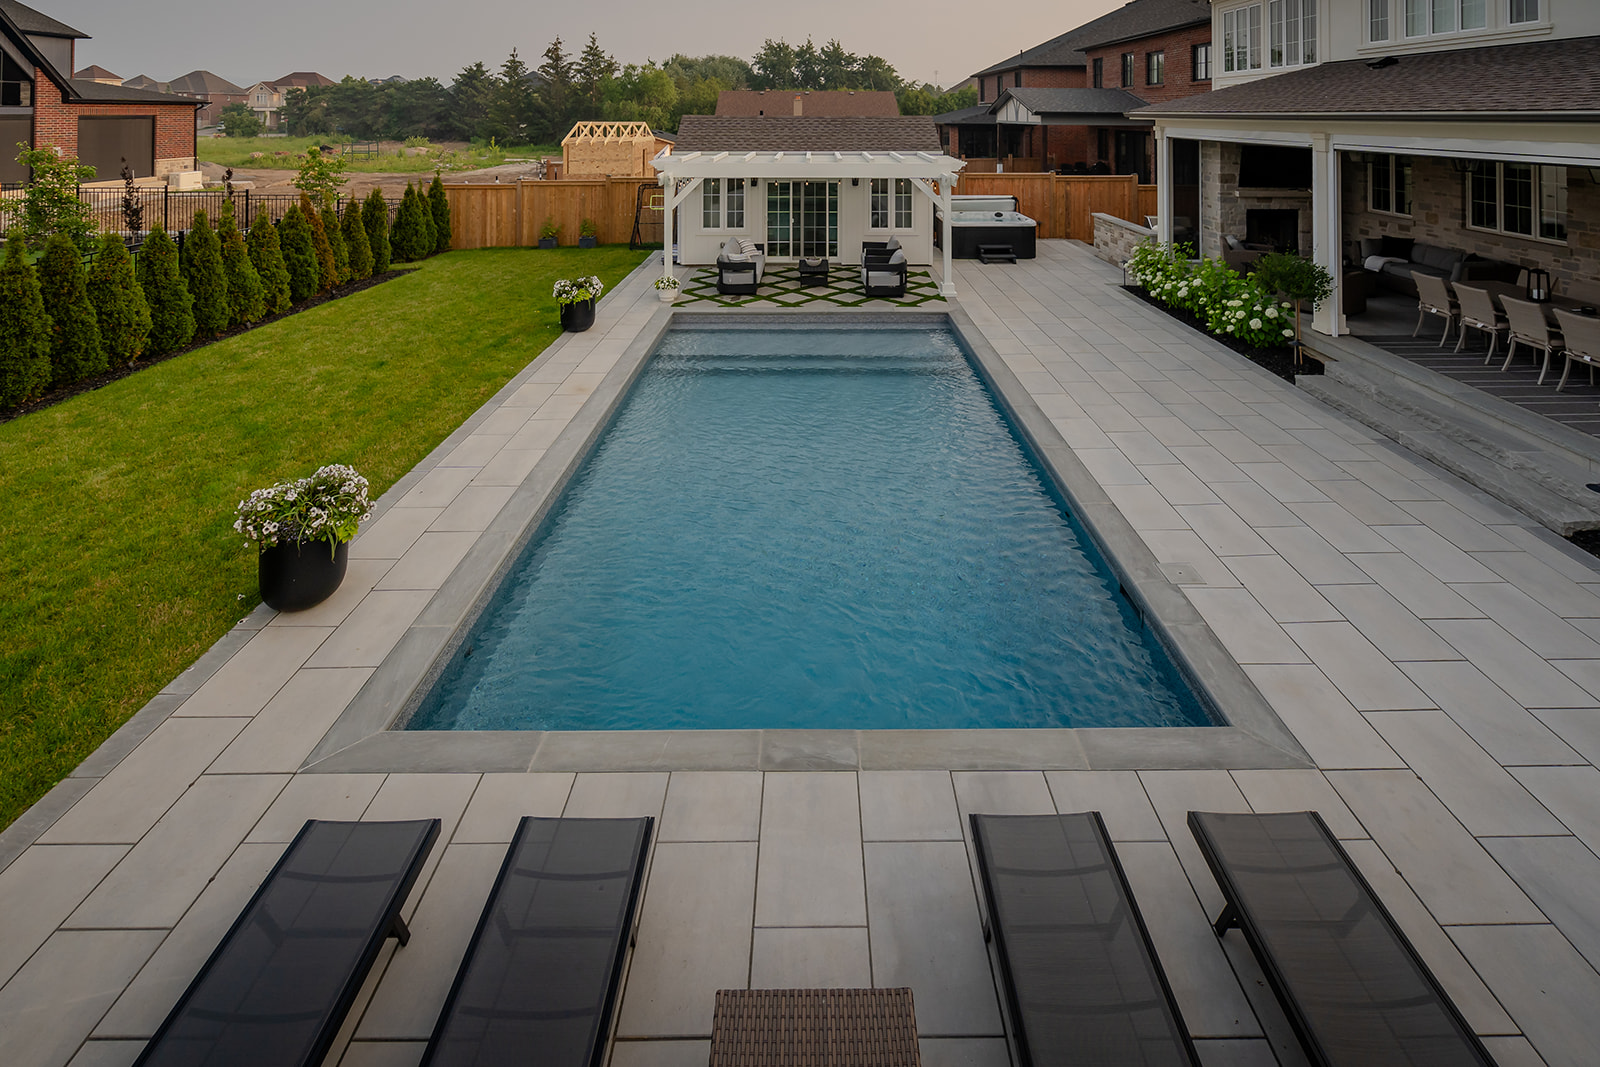 an inground pool with lounge chairs at the end of the pool.